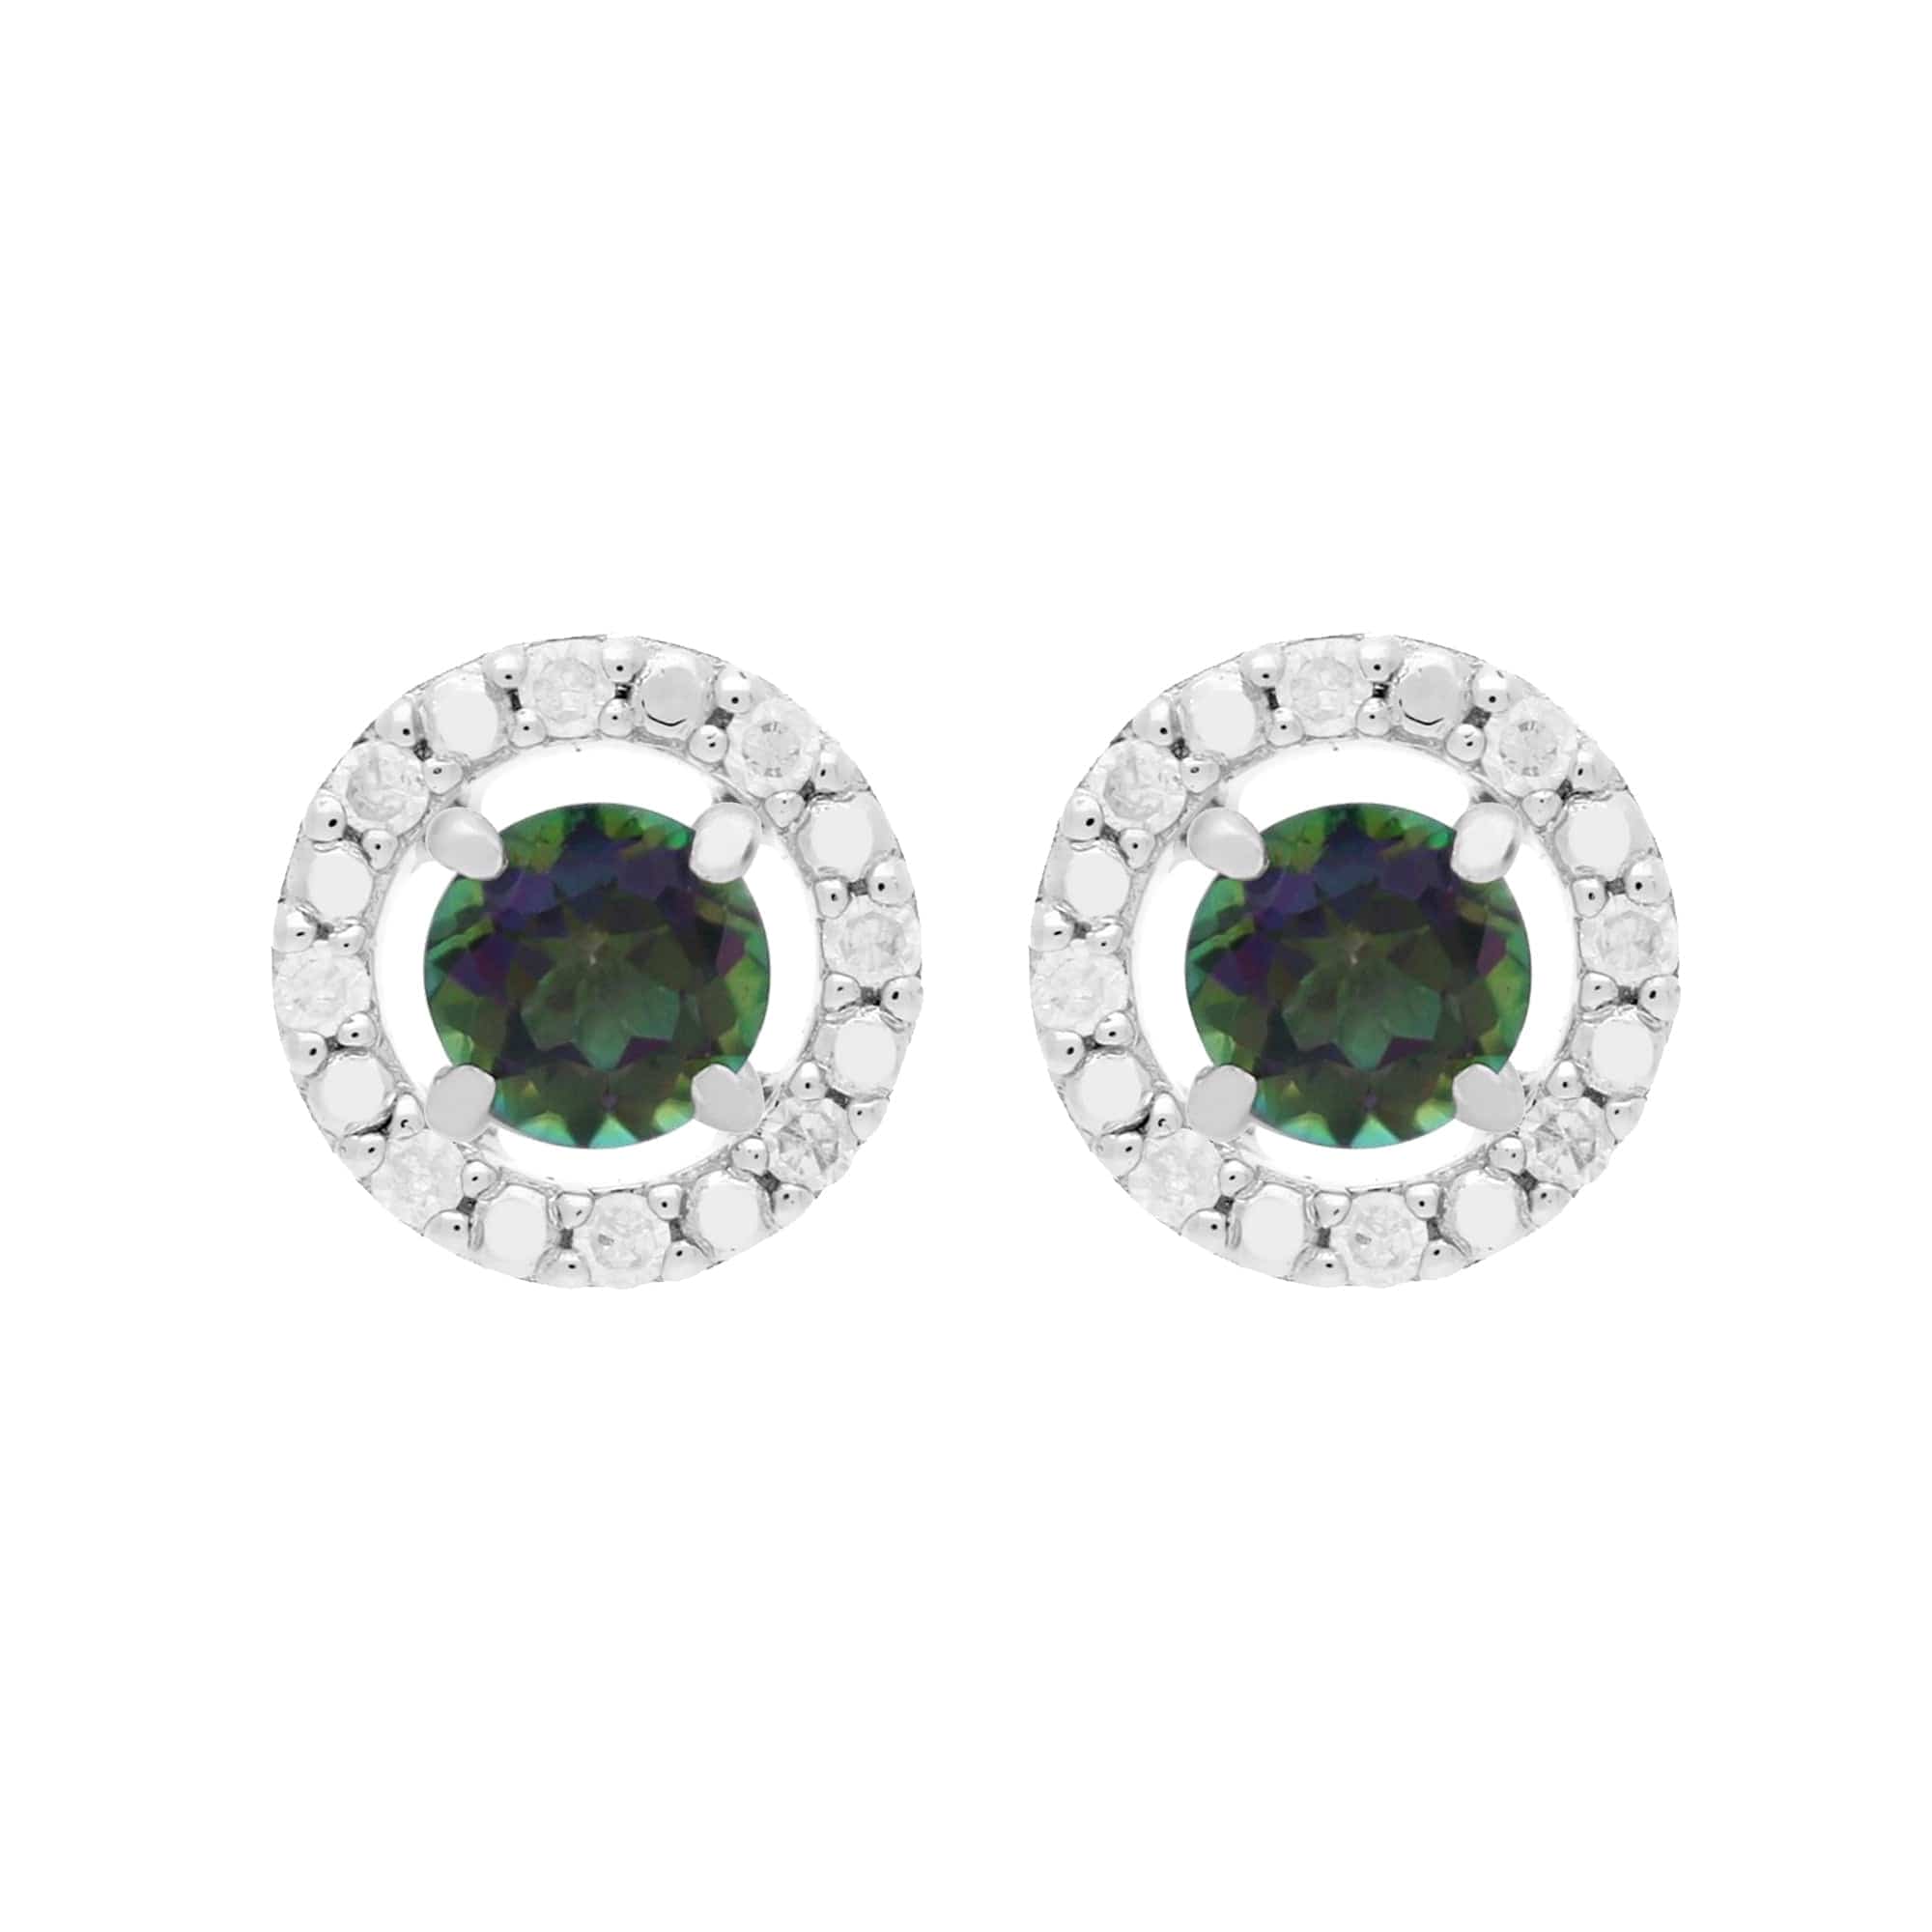 162E0071169-162E0228019 Classic Round Mystic Topaz Stud Earrings with Detachable Diamond Round Ear Jacket in 9ct White Gold 1